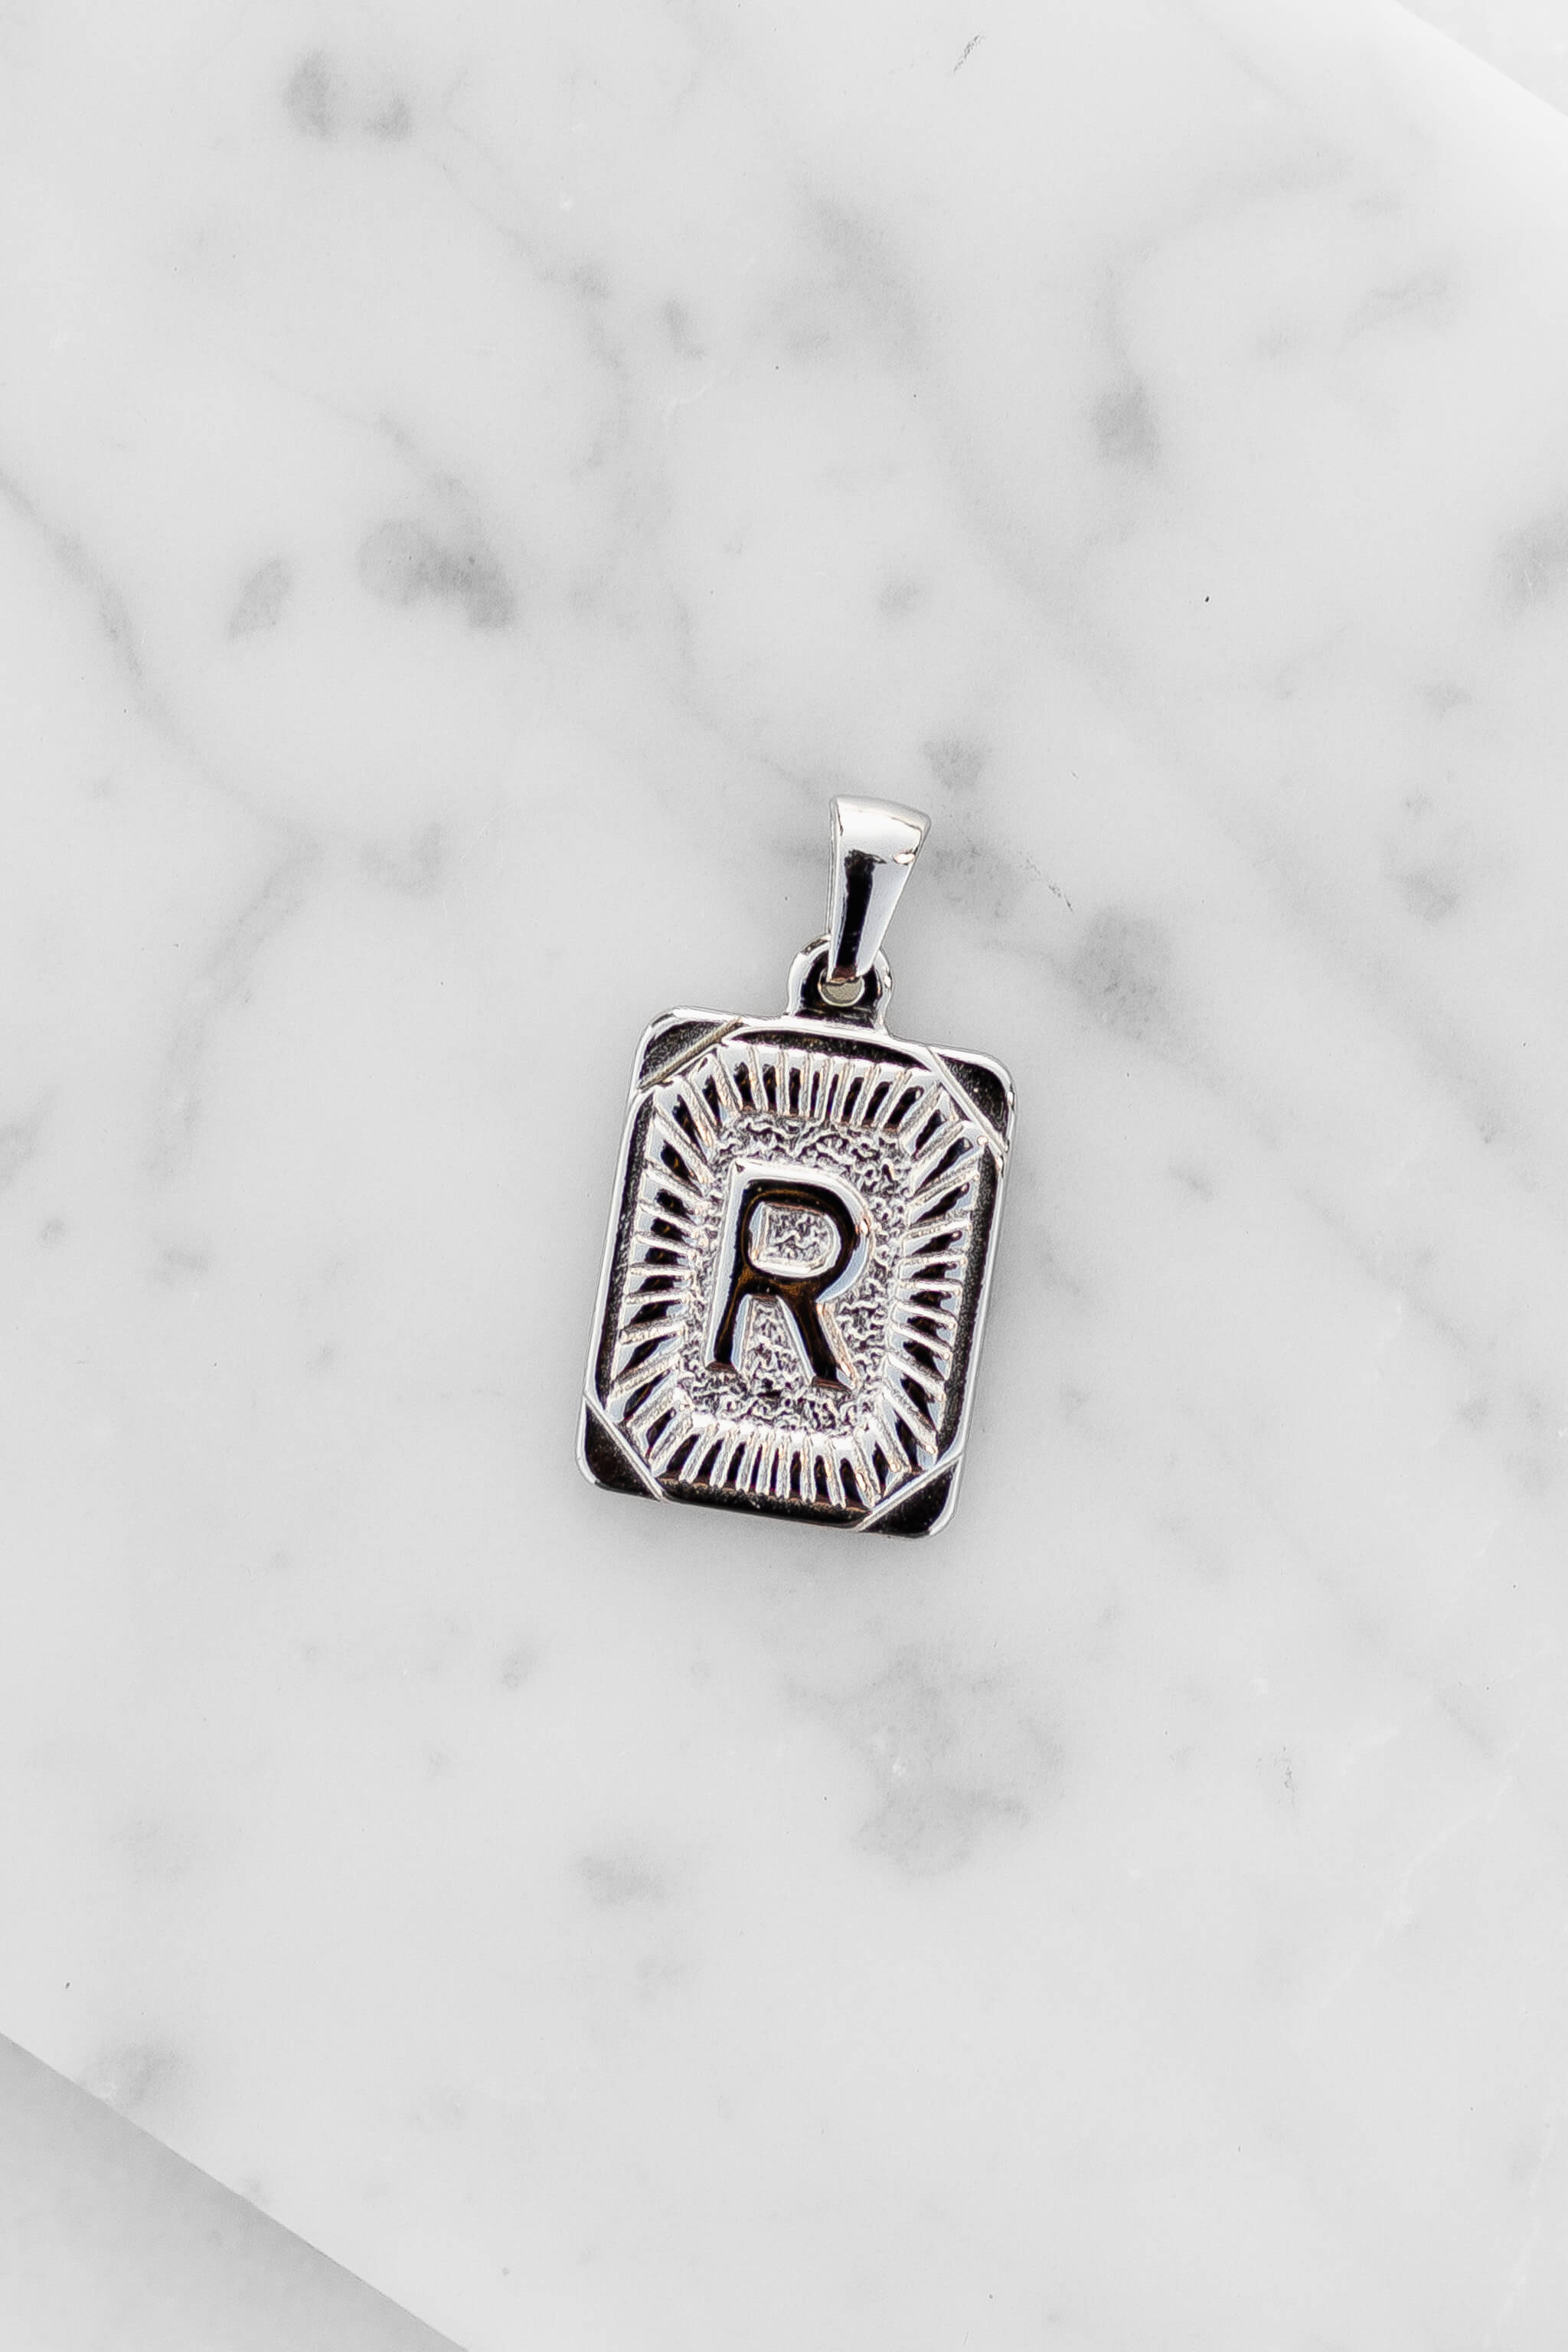 Silver Monogram Letter "R" Charm laying on a marble